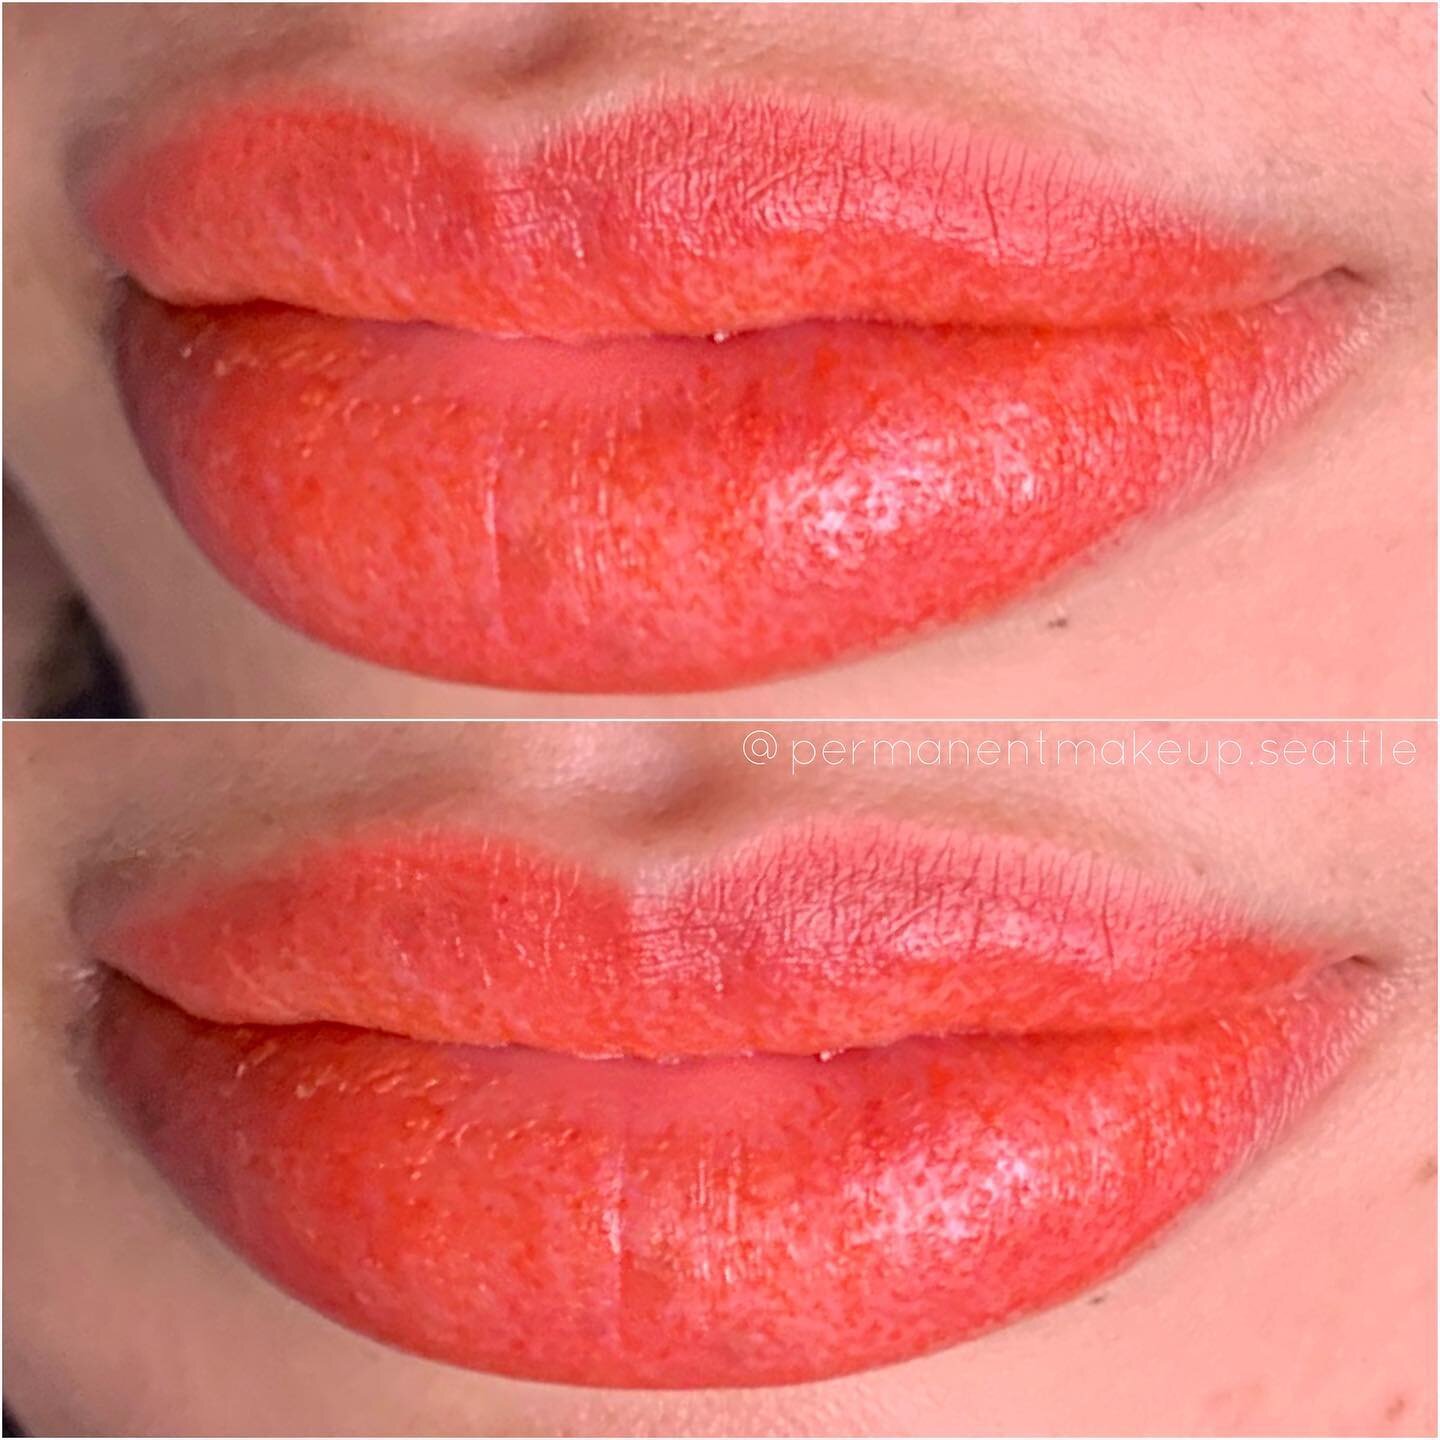 💋💋💋Lip Blush 💋💋💋
.
Transform your lips with Lip Blush. This service is customizable to give you the results your looking for! 
.
Check out @permanentmakeup.seattle for more before and after images and more info
.
Have fuller lips and lip color 